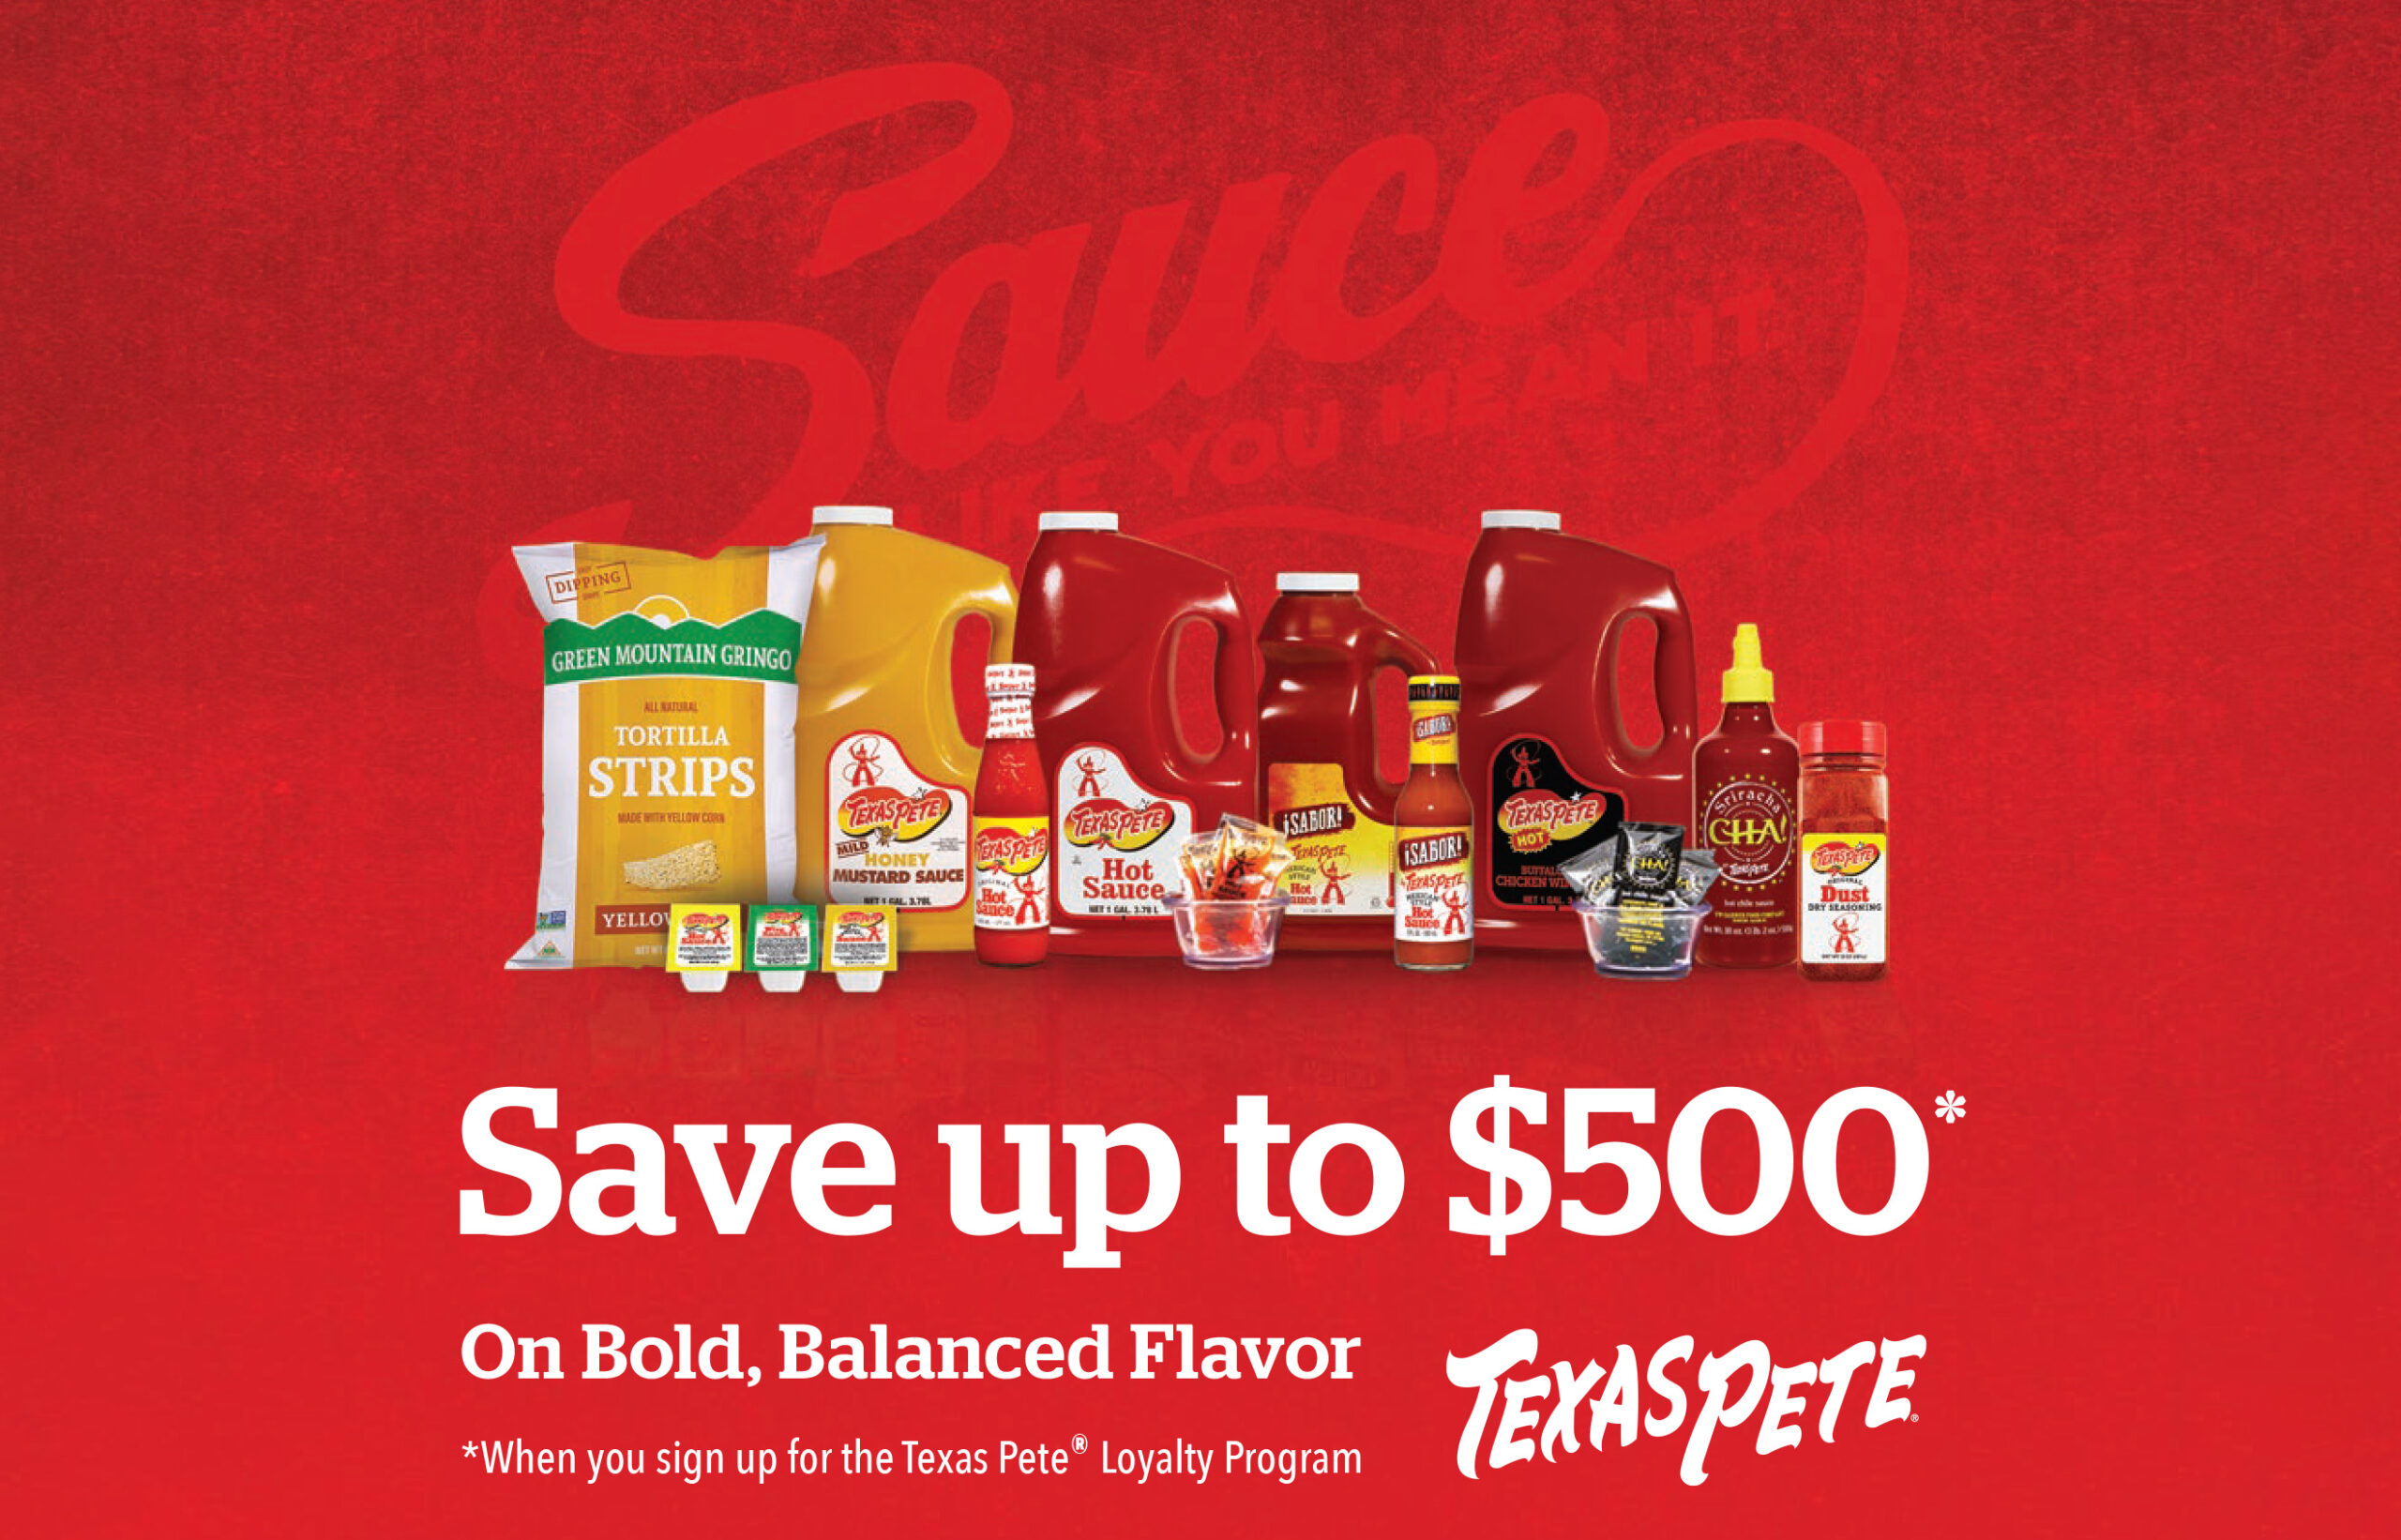 Save up to $500 on bold, balanced flavor when you sign up for the Texas Pete loyalty program